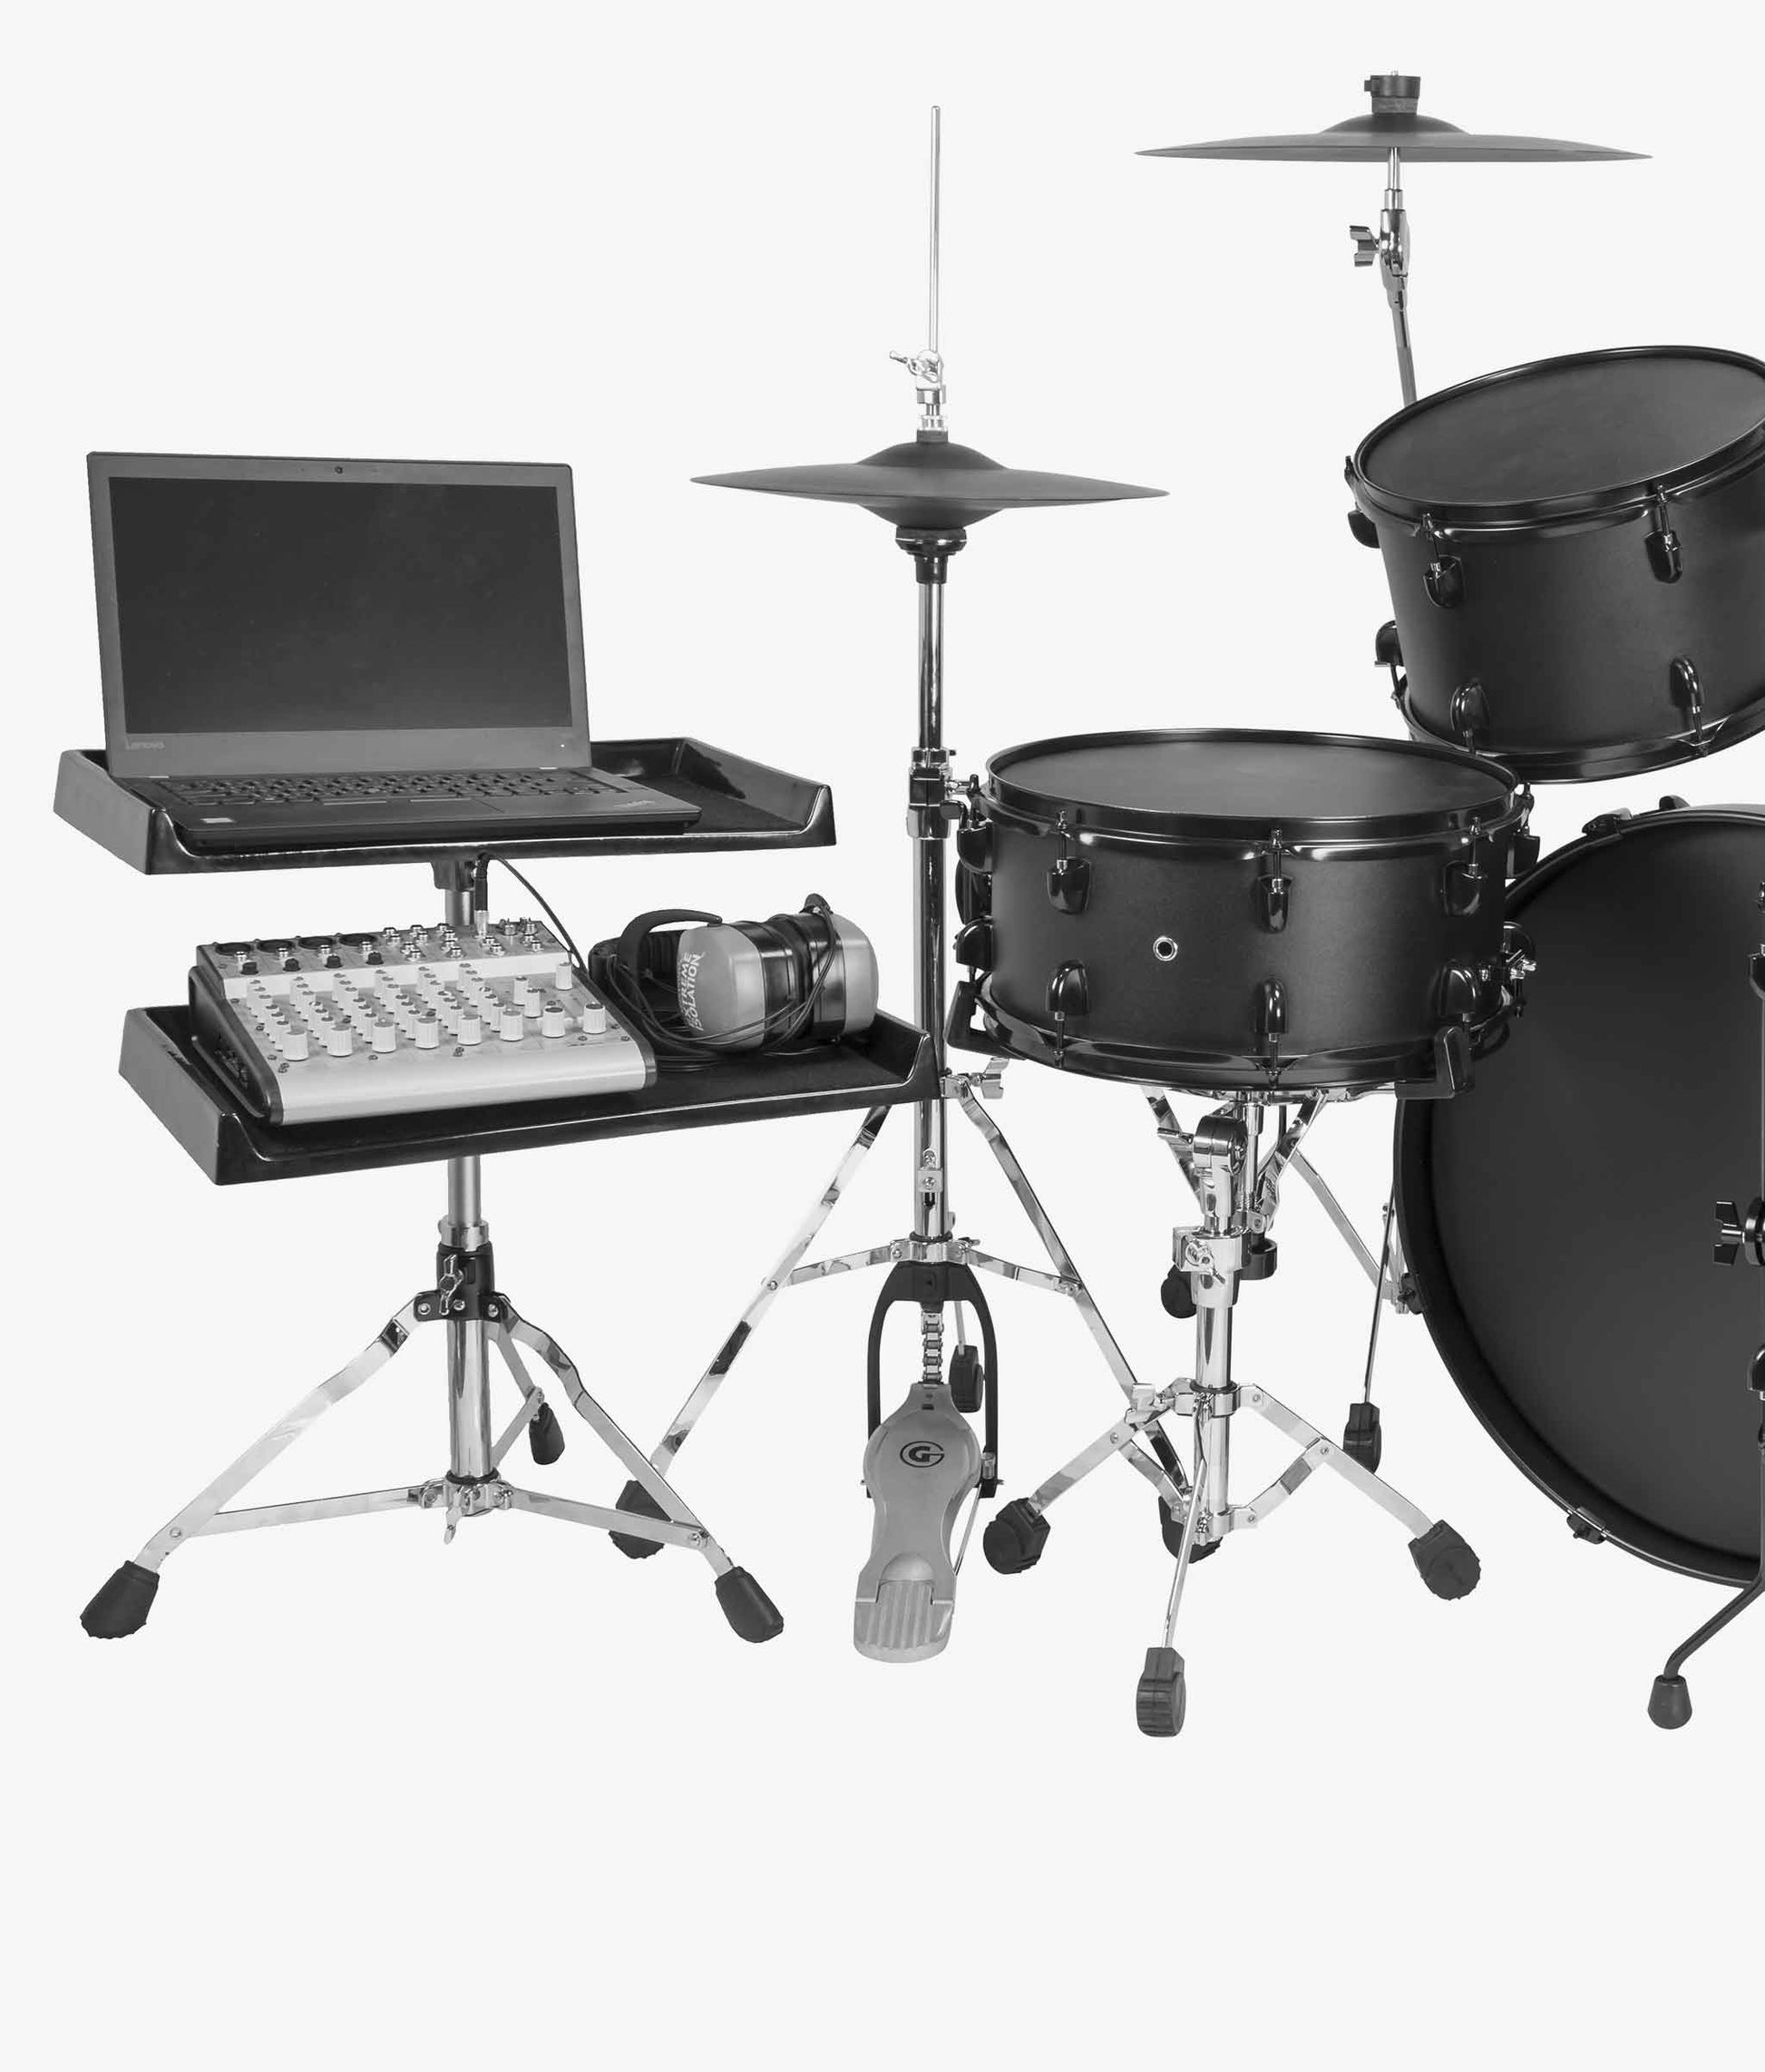  Gibraltar SC-PSE-MNT 16" x 10" Sidekick Essentials Fiberglass Tray with Clamp percussion table